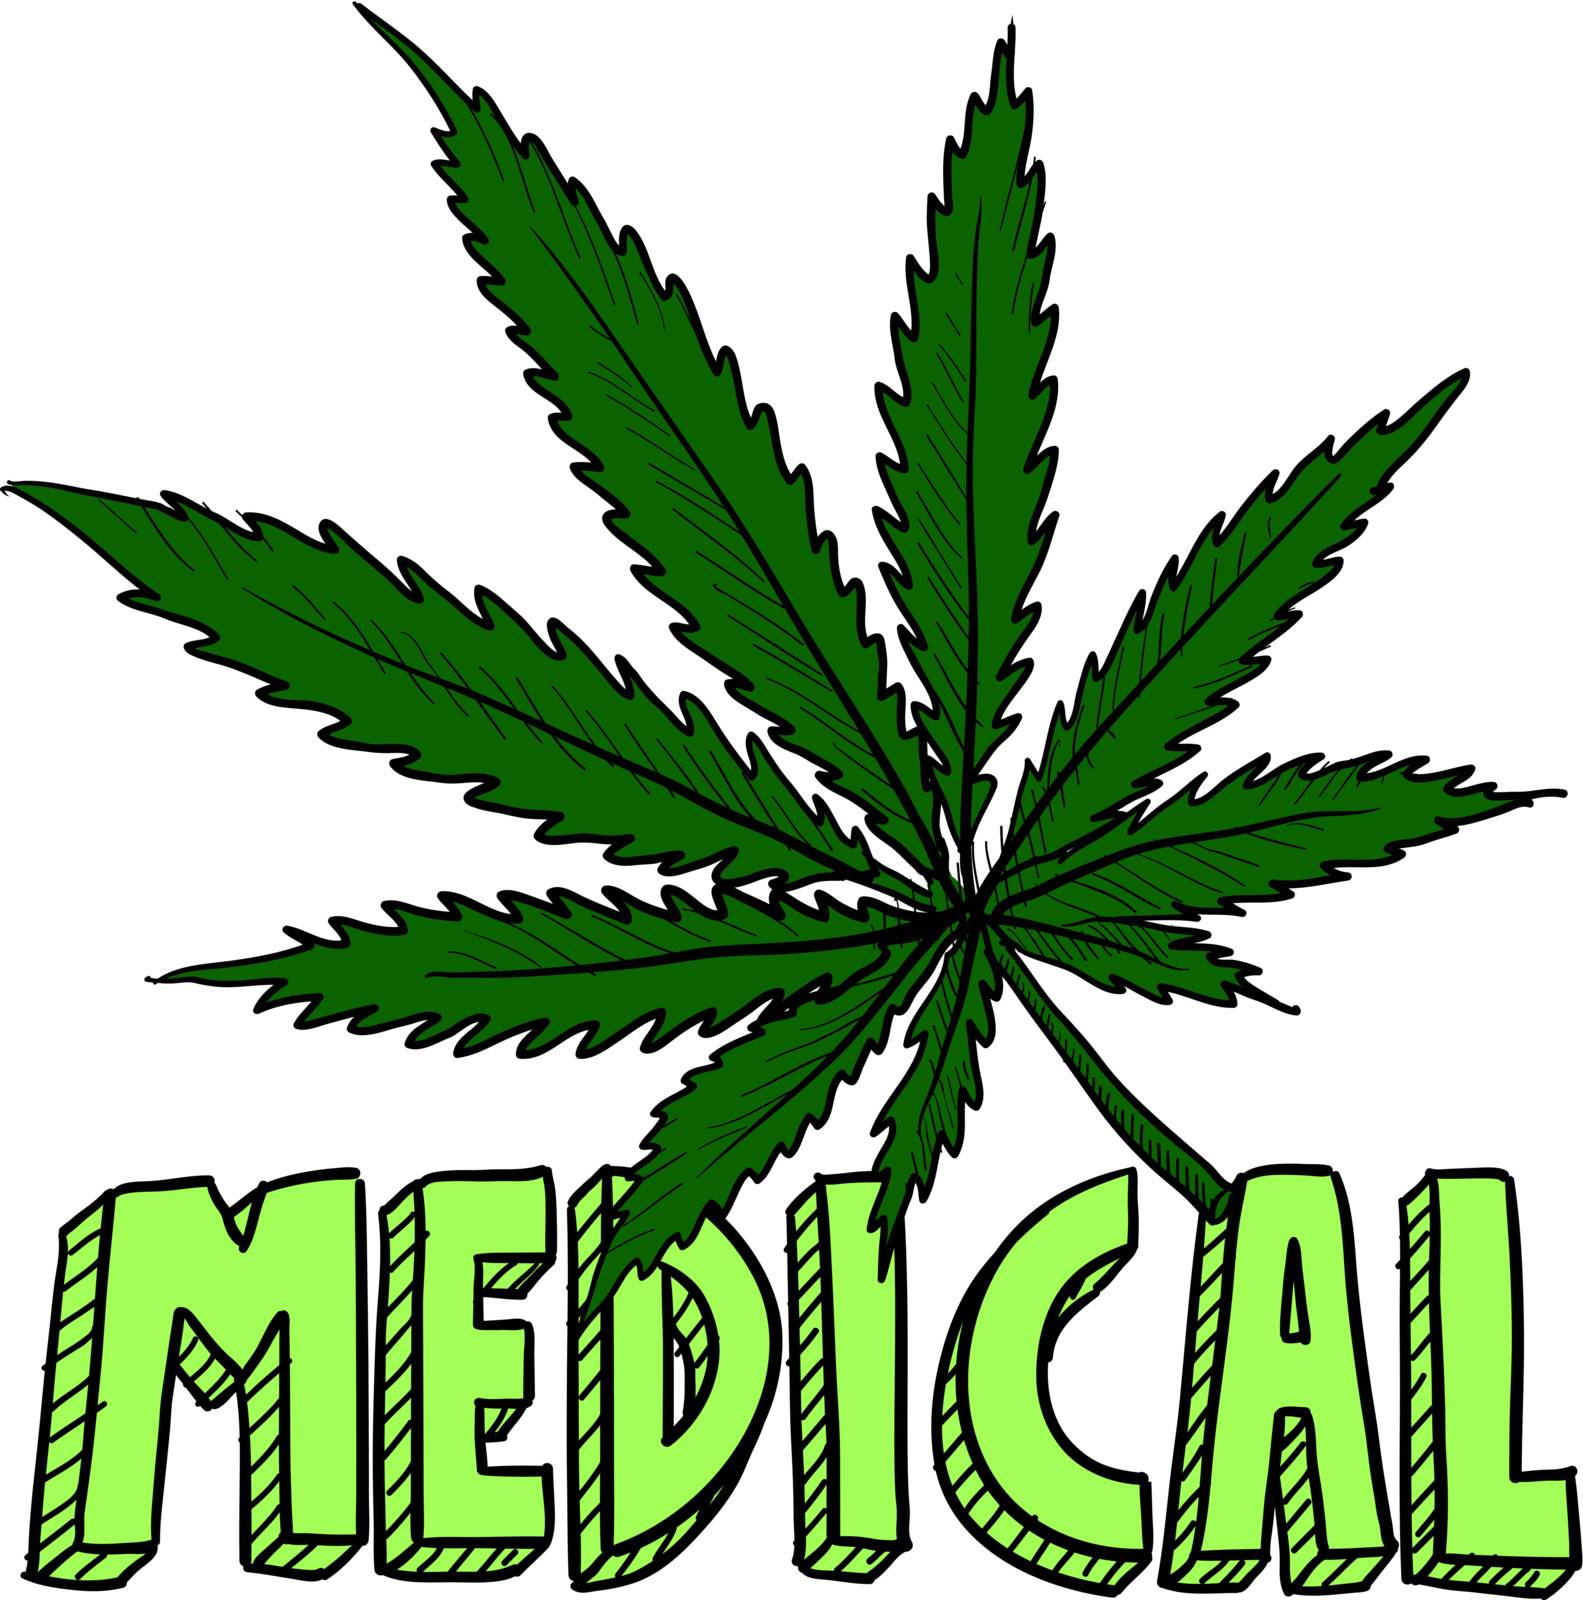 Doodle style medical marijuana leaf sketch in vector format. Includes text and pot plant.